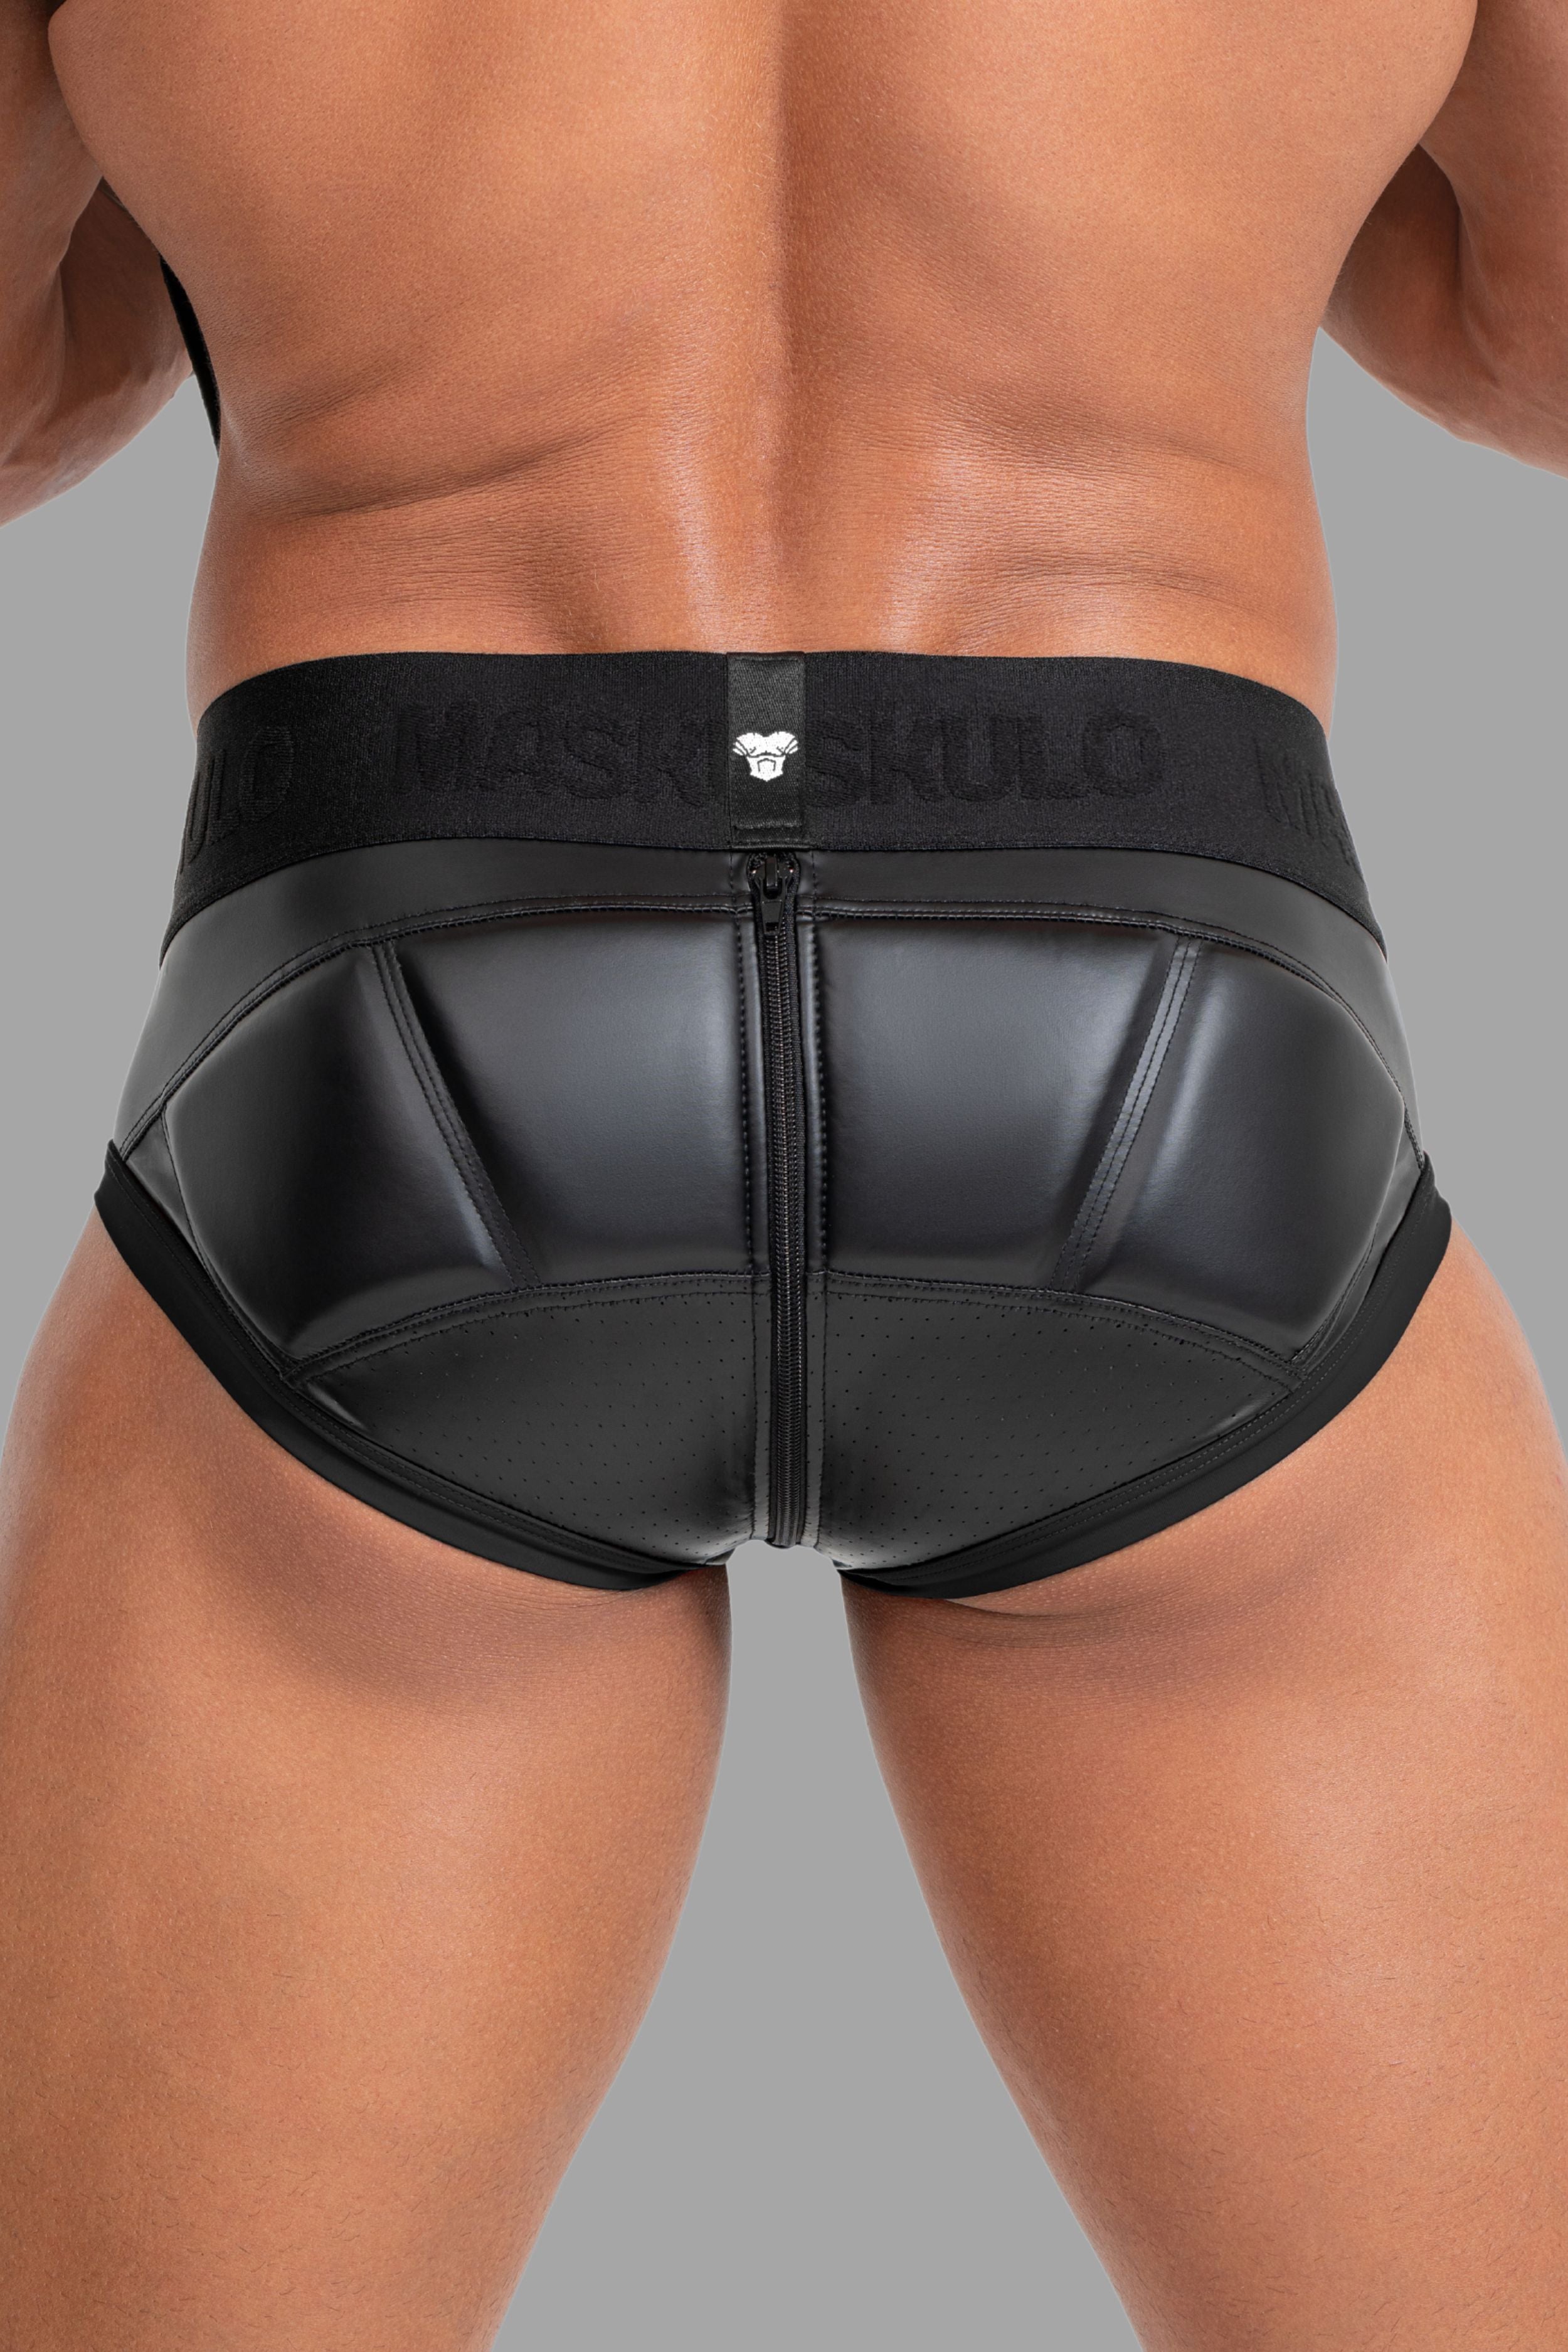 Briefs with Pads. Black